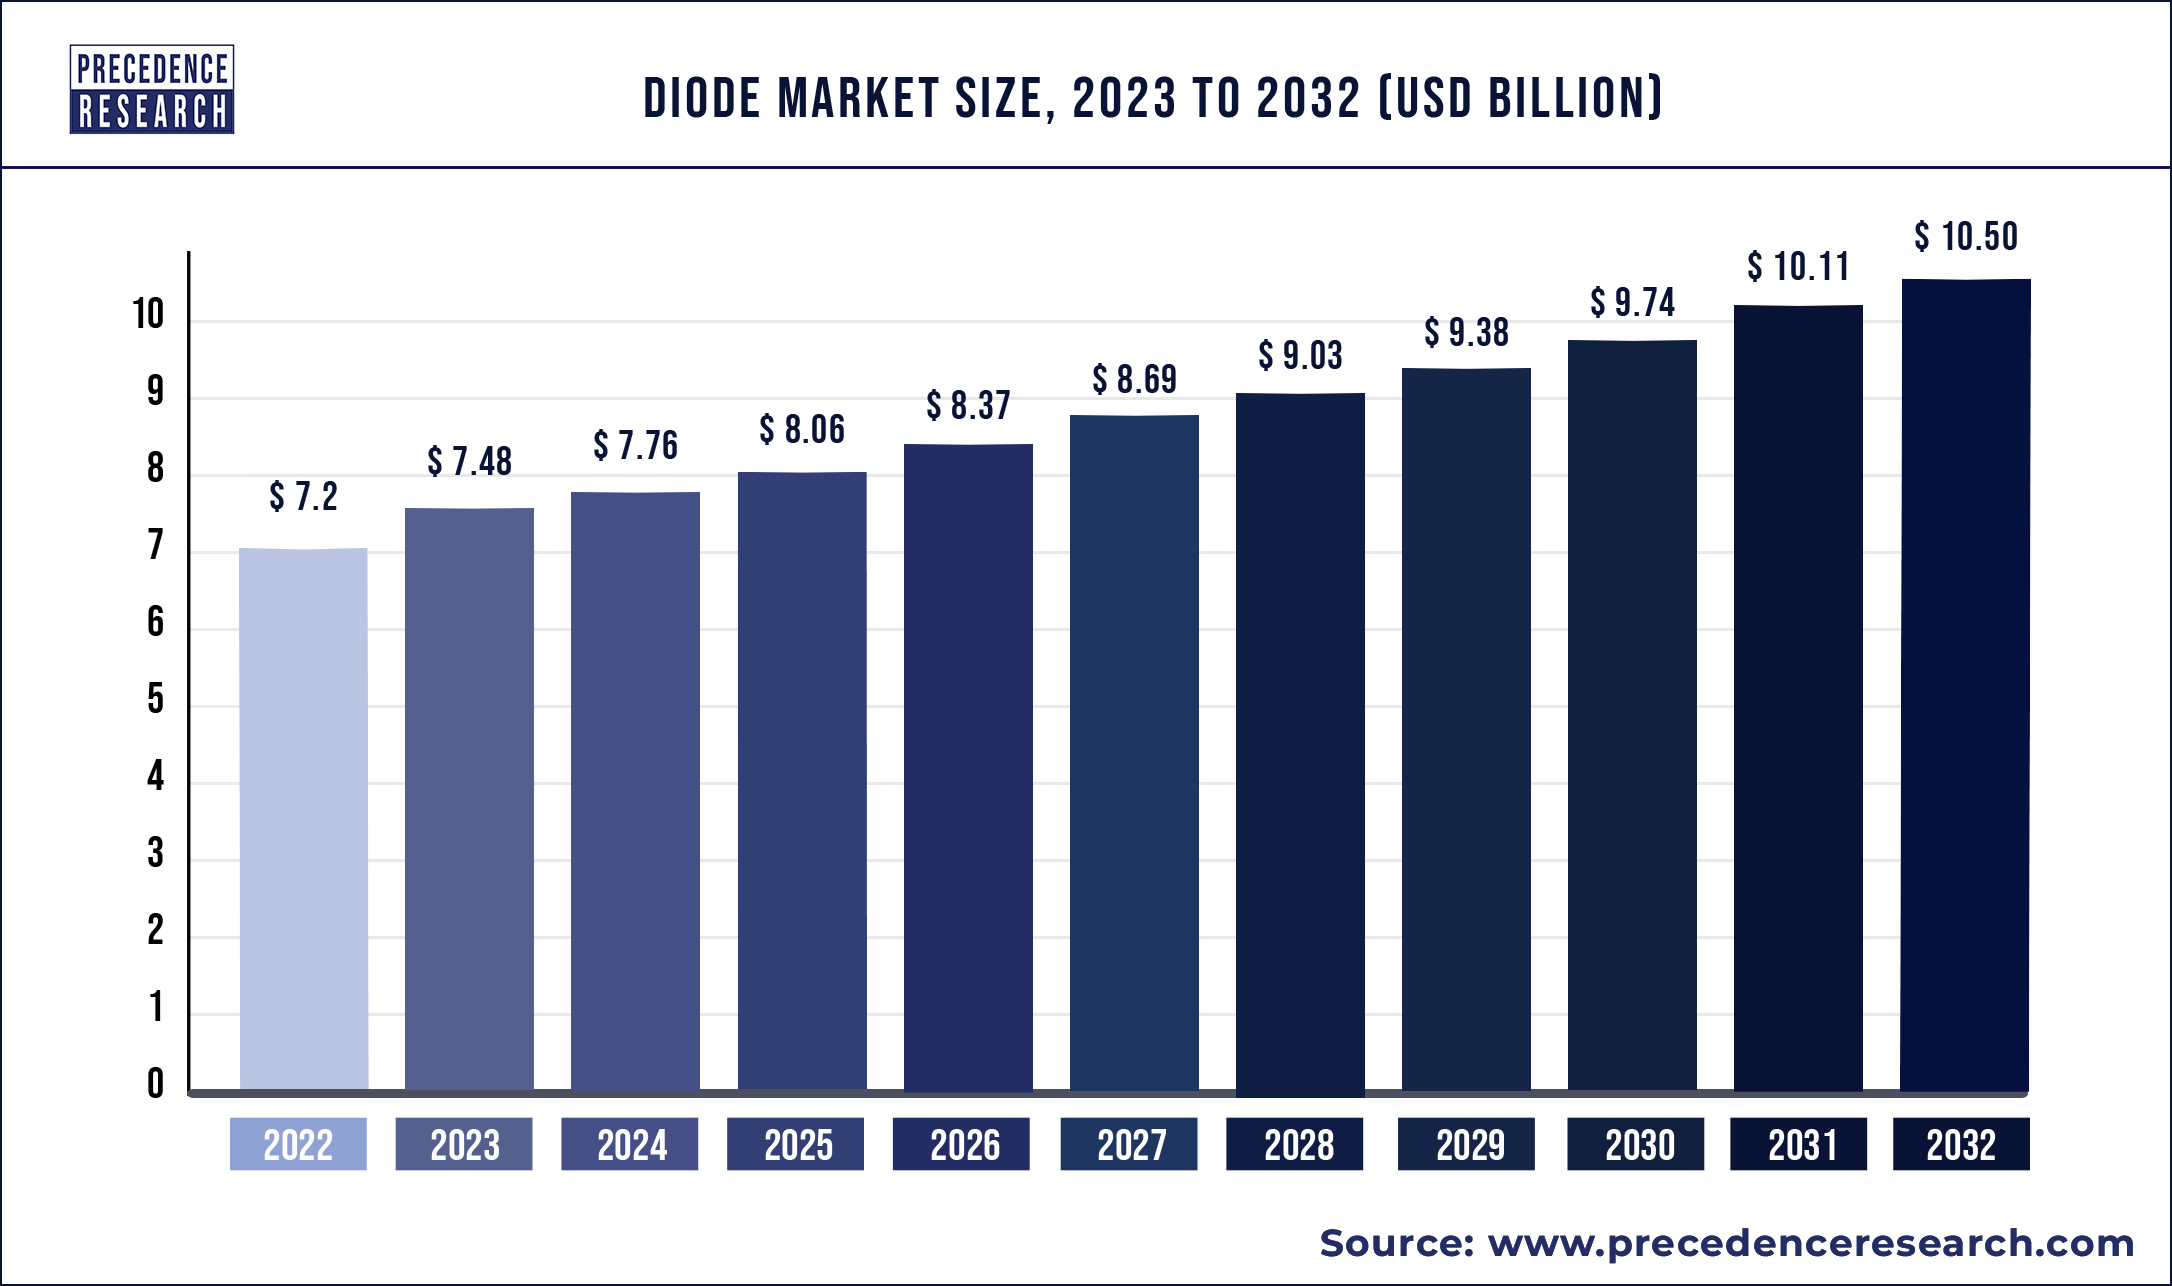 Diode Market Size 2023 To 2032